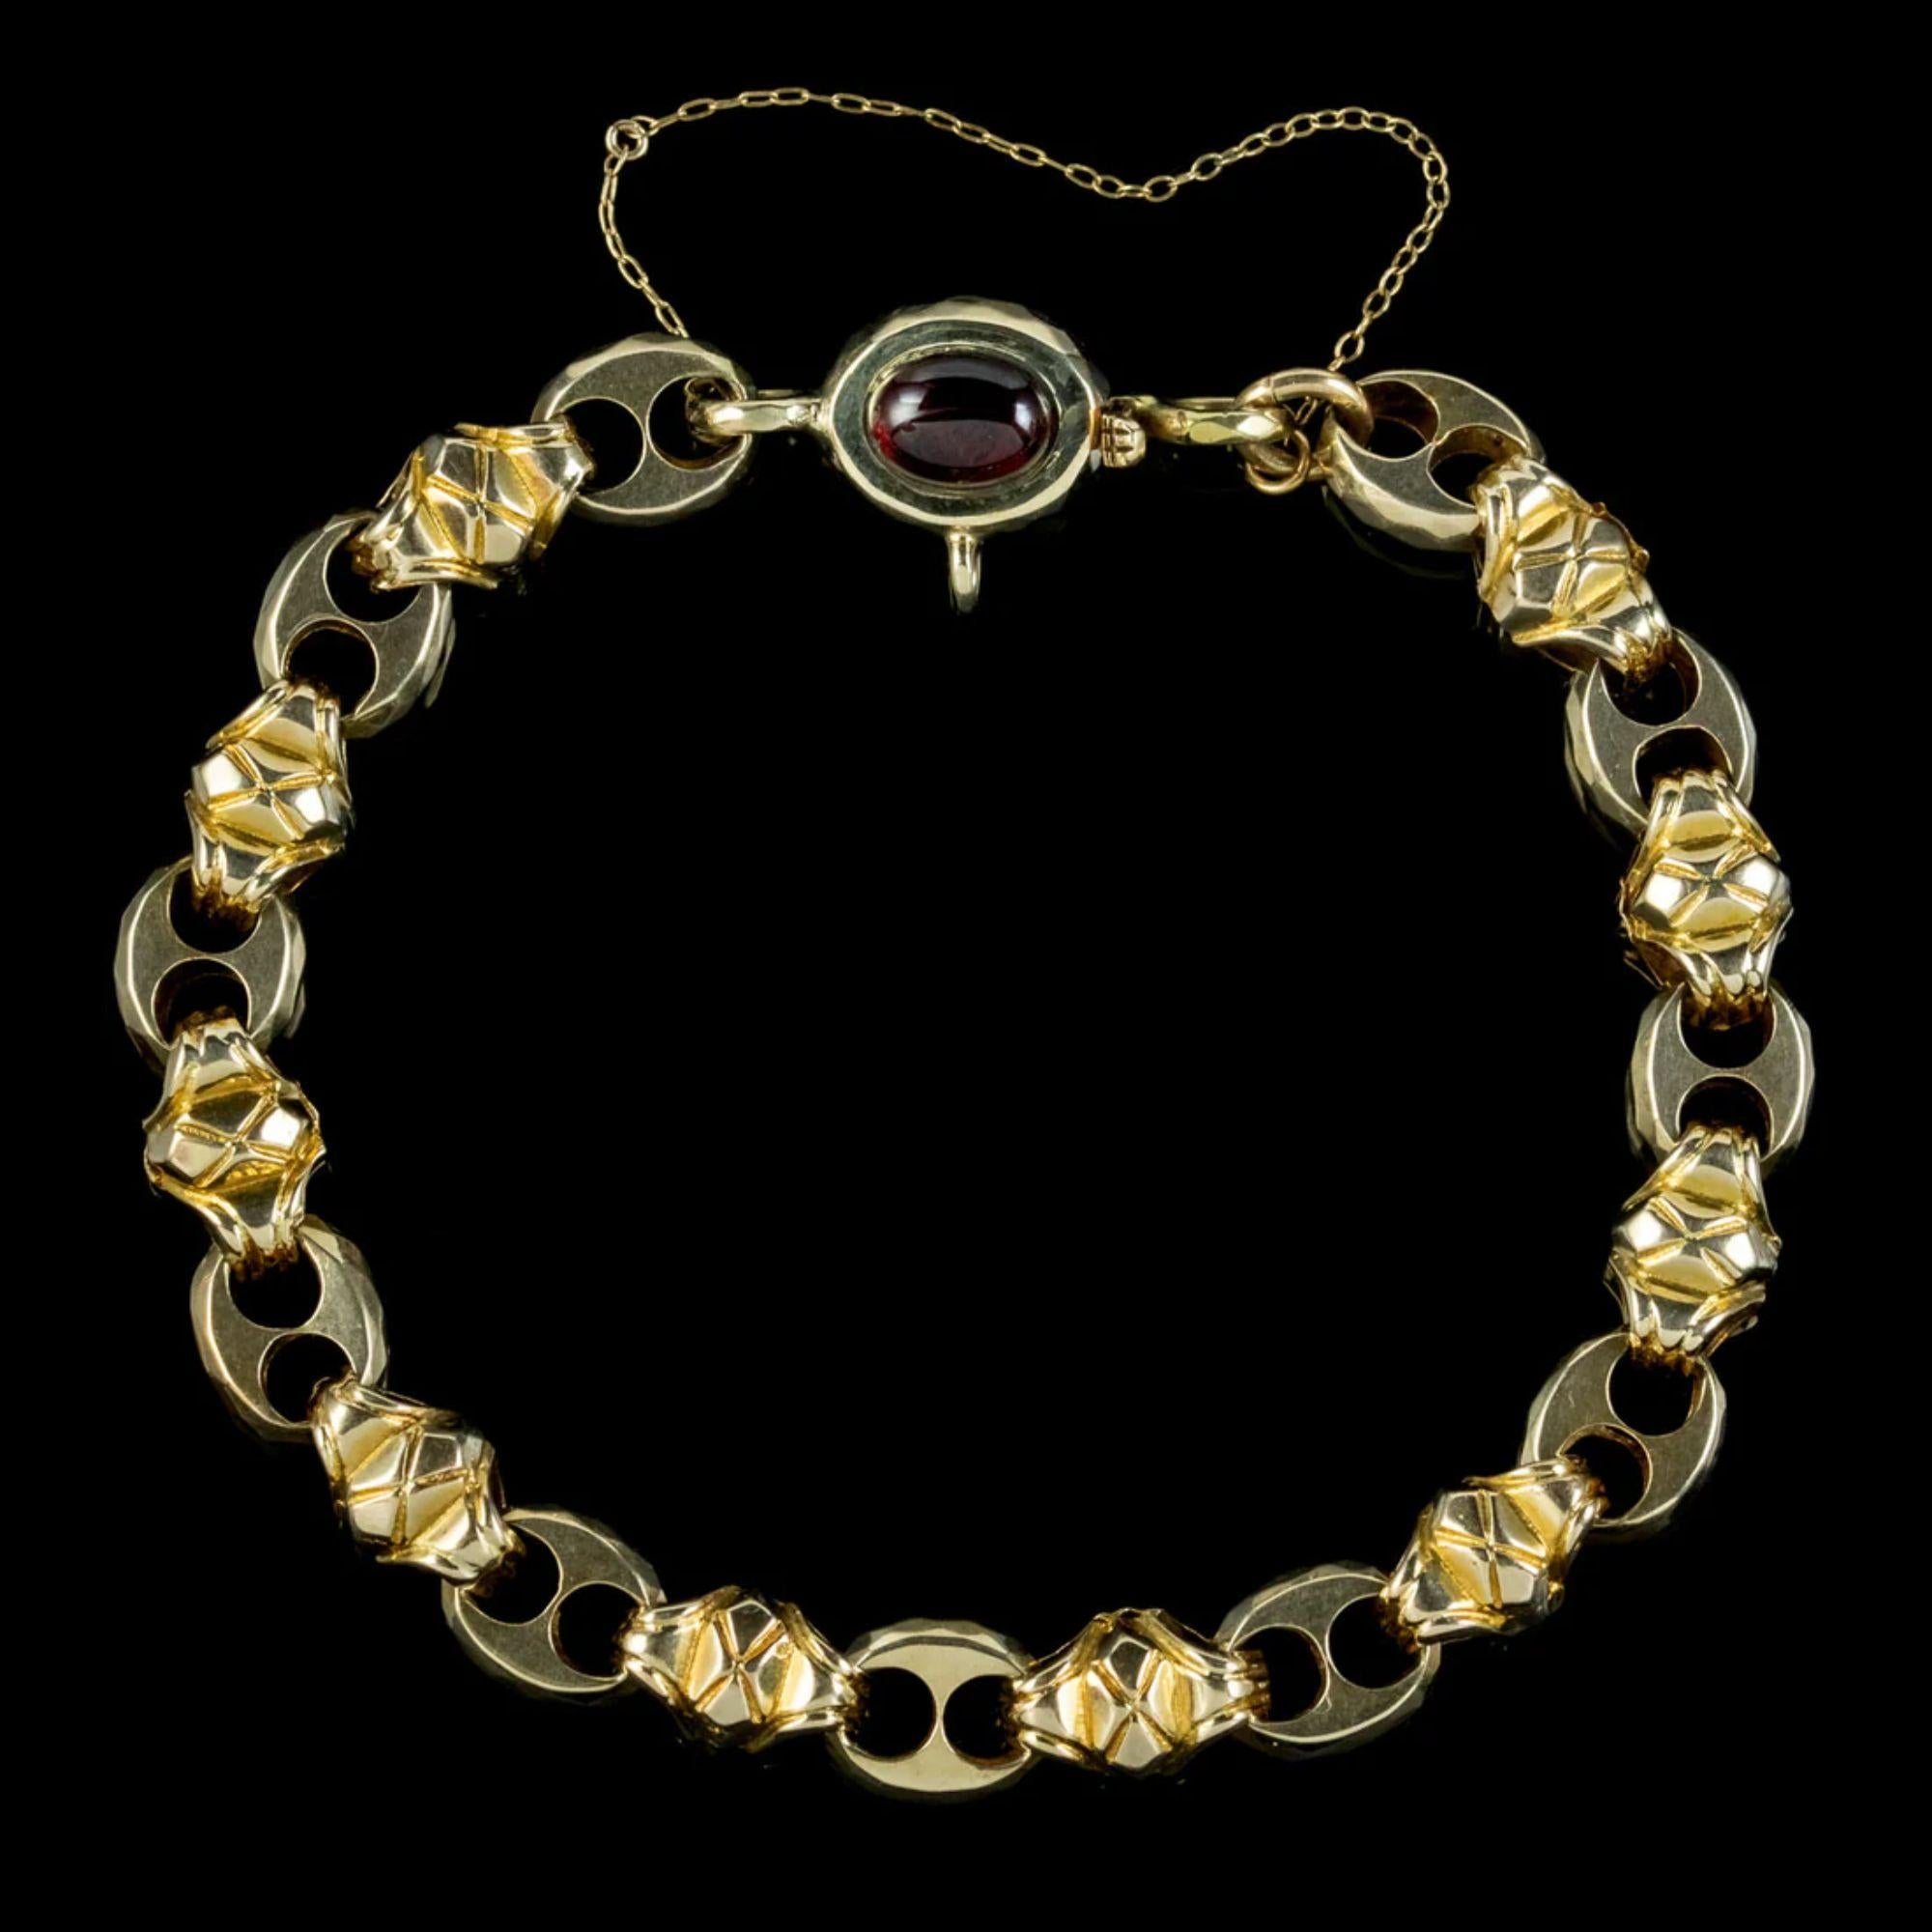 A stylish antique Victorian bracelet from the late 19th Century made up of beautiful, anchor/ fancy links fashioned in 15ct gold with chased patterning and faceted sides.

It’s in excellent condition and held securely around the wrist by a box clasp